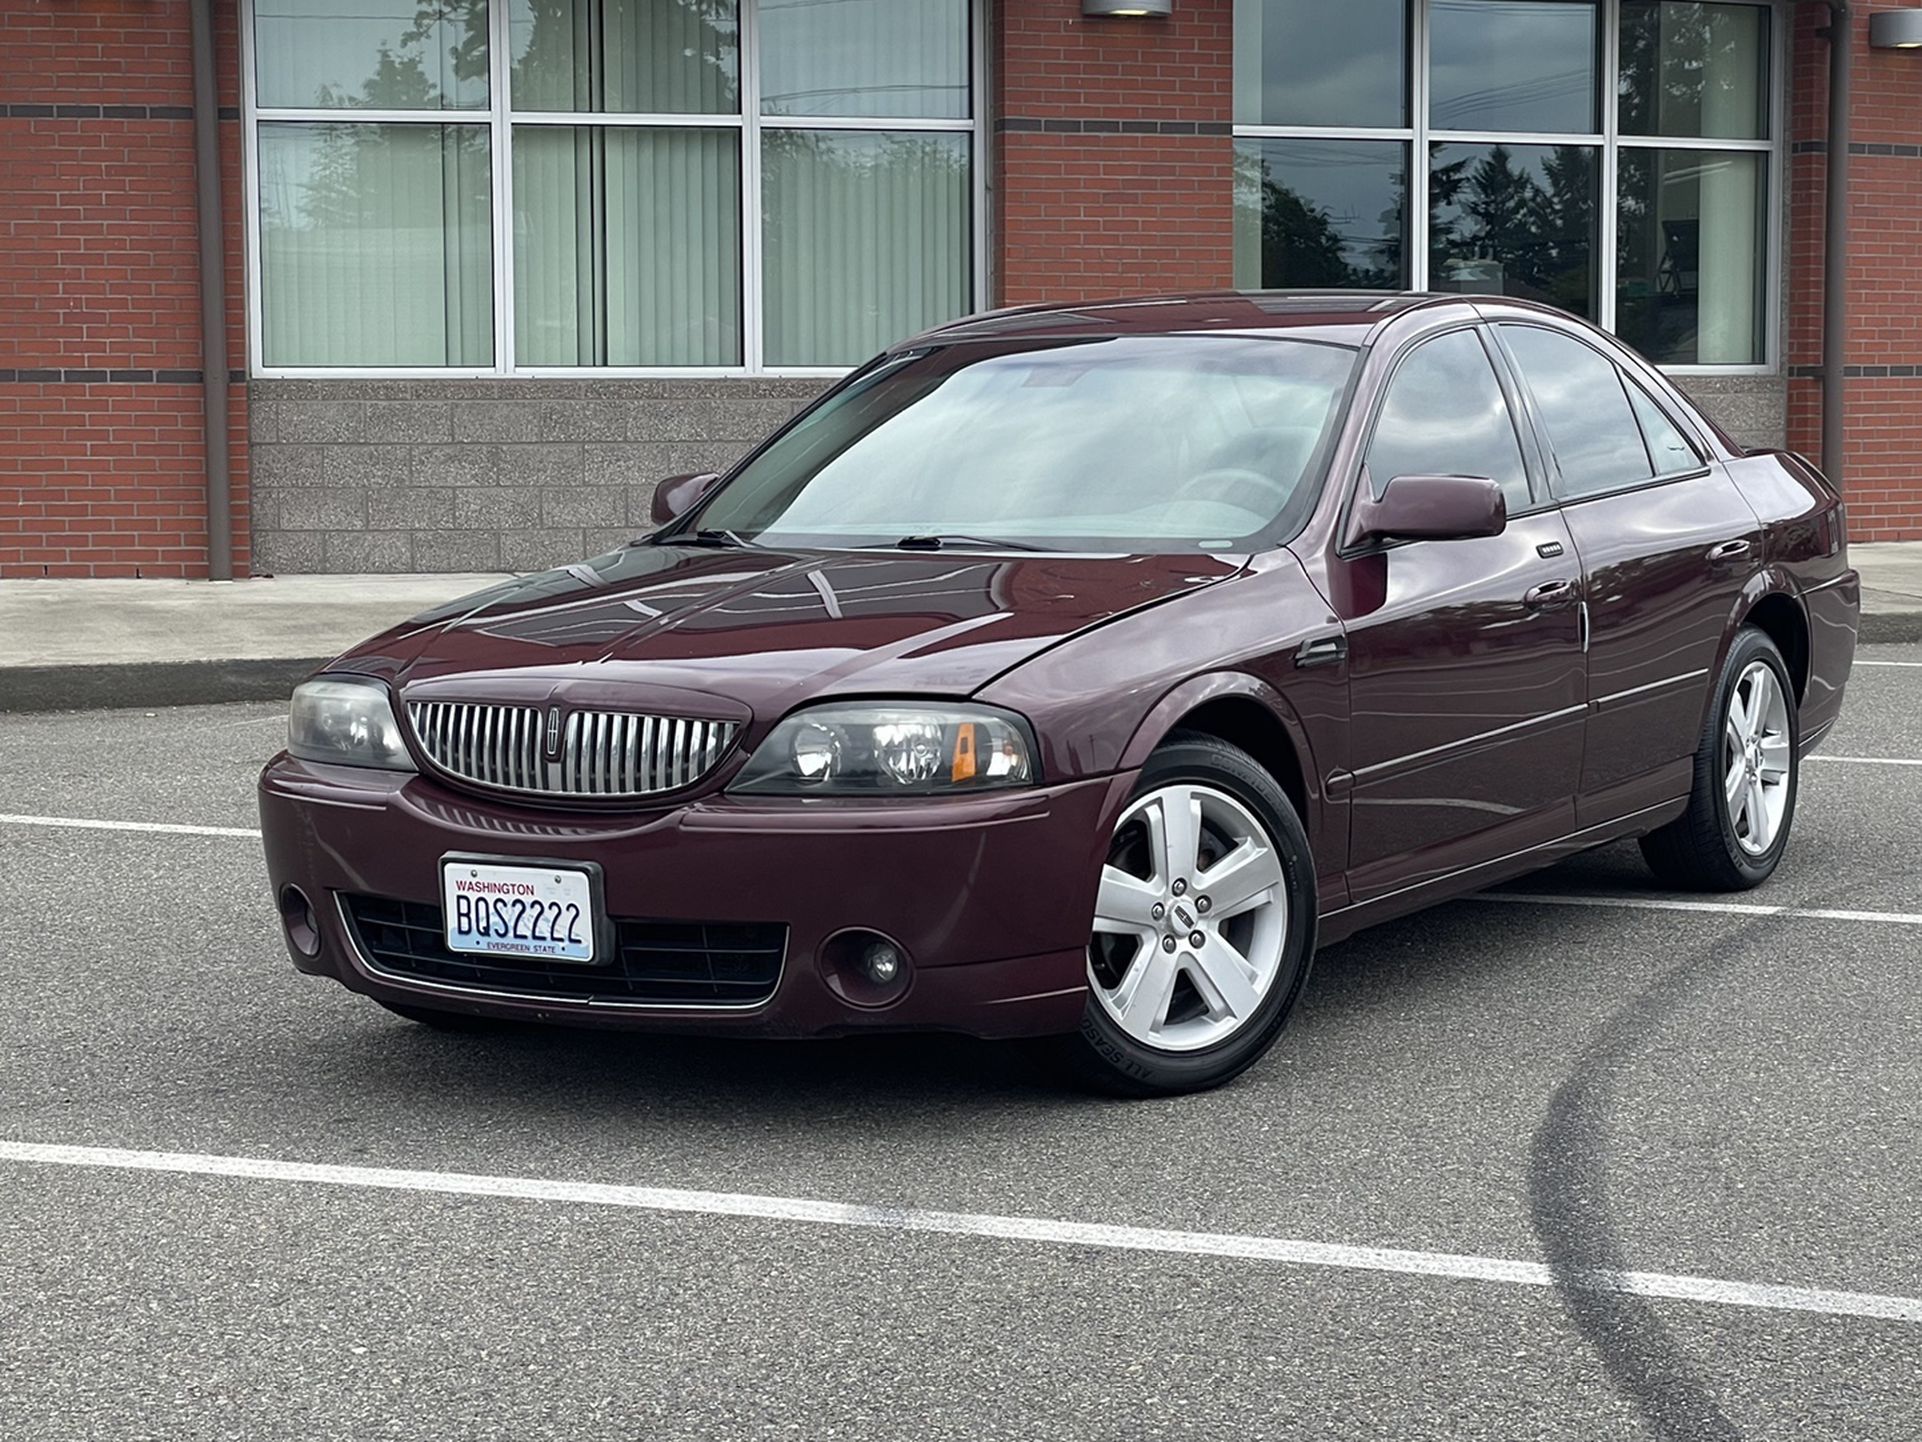 06 Lincoln Ls For Sale In Tacoma Wa Offerup